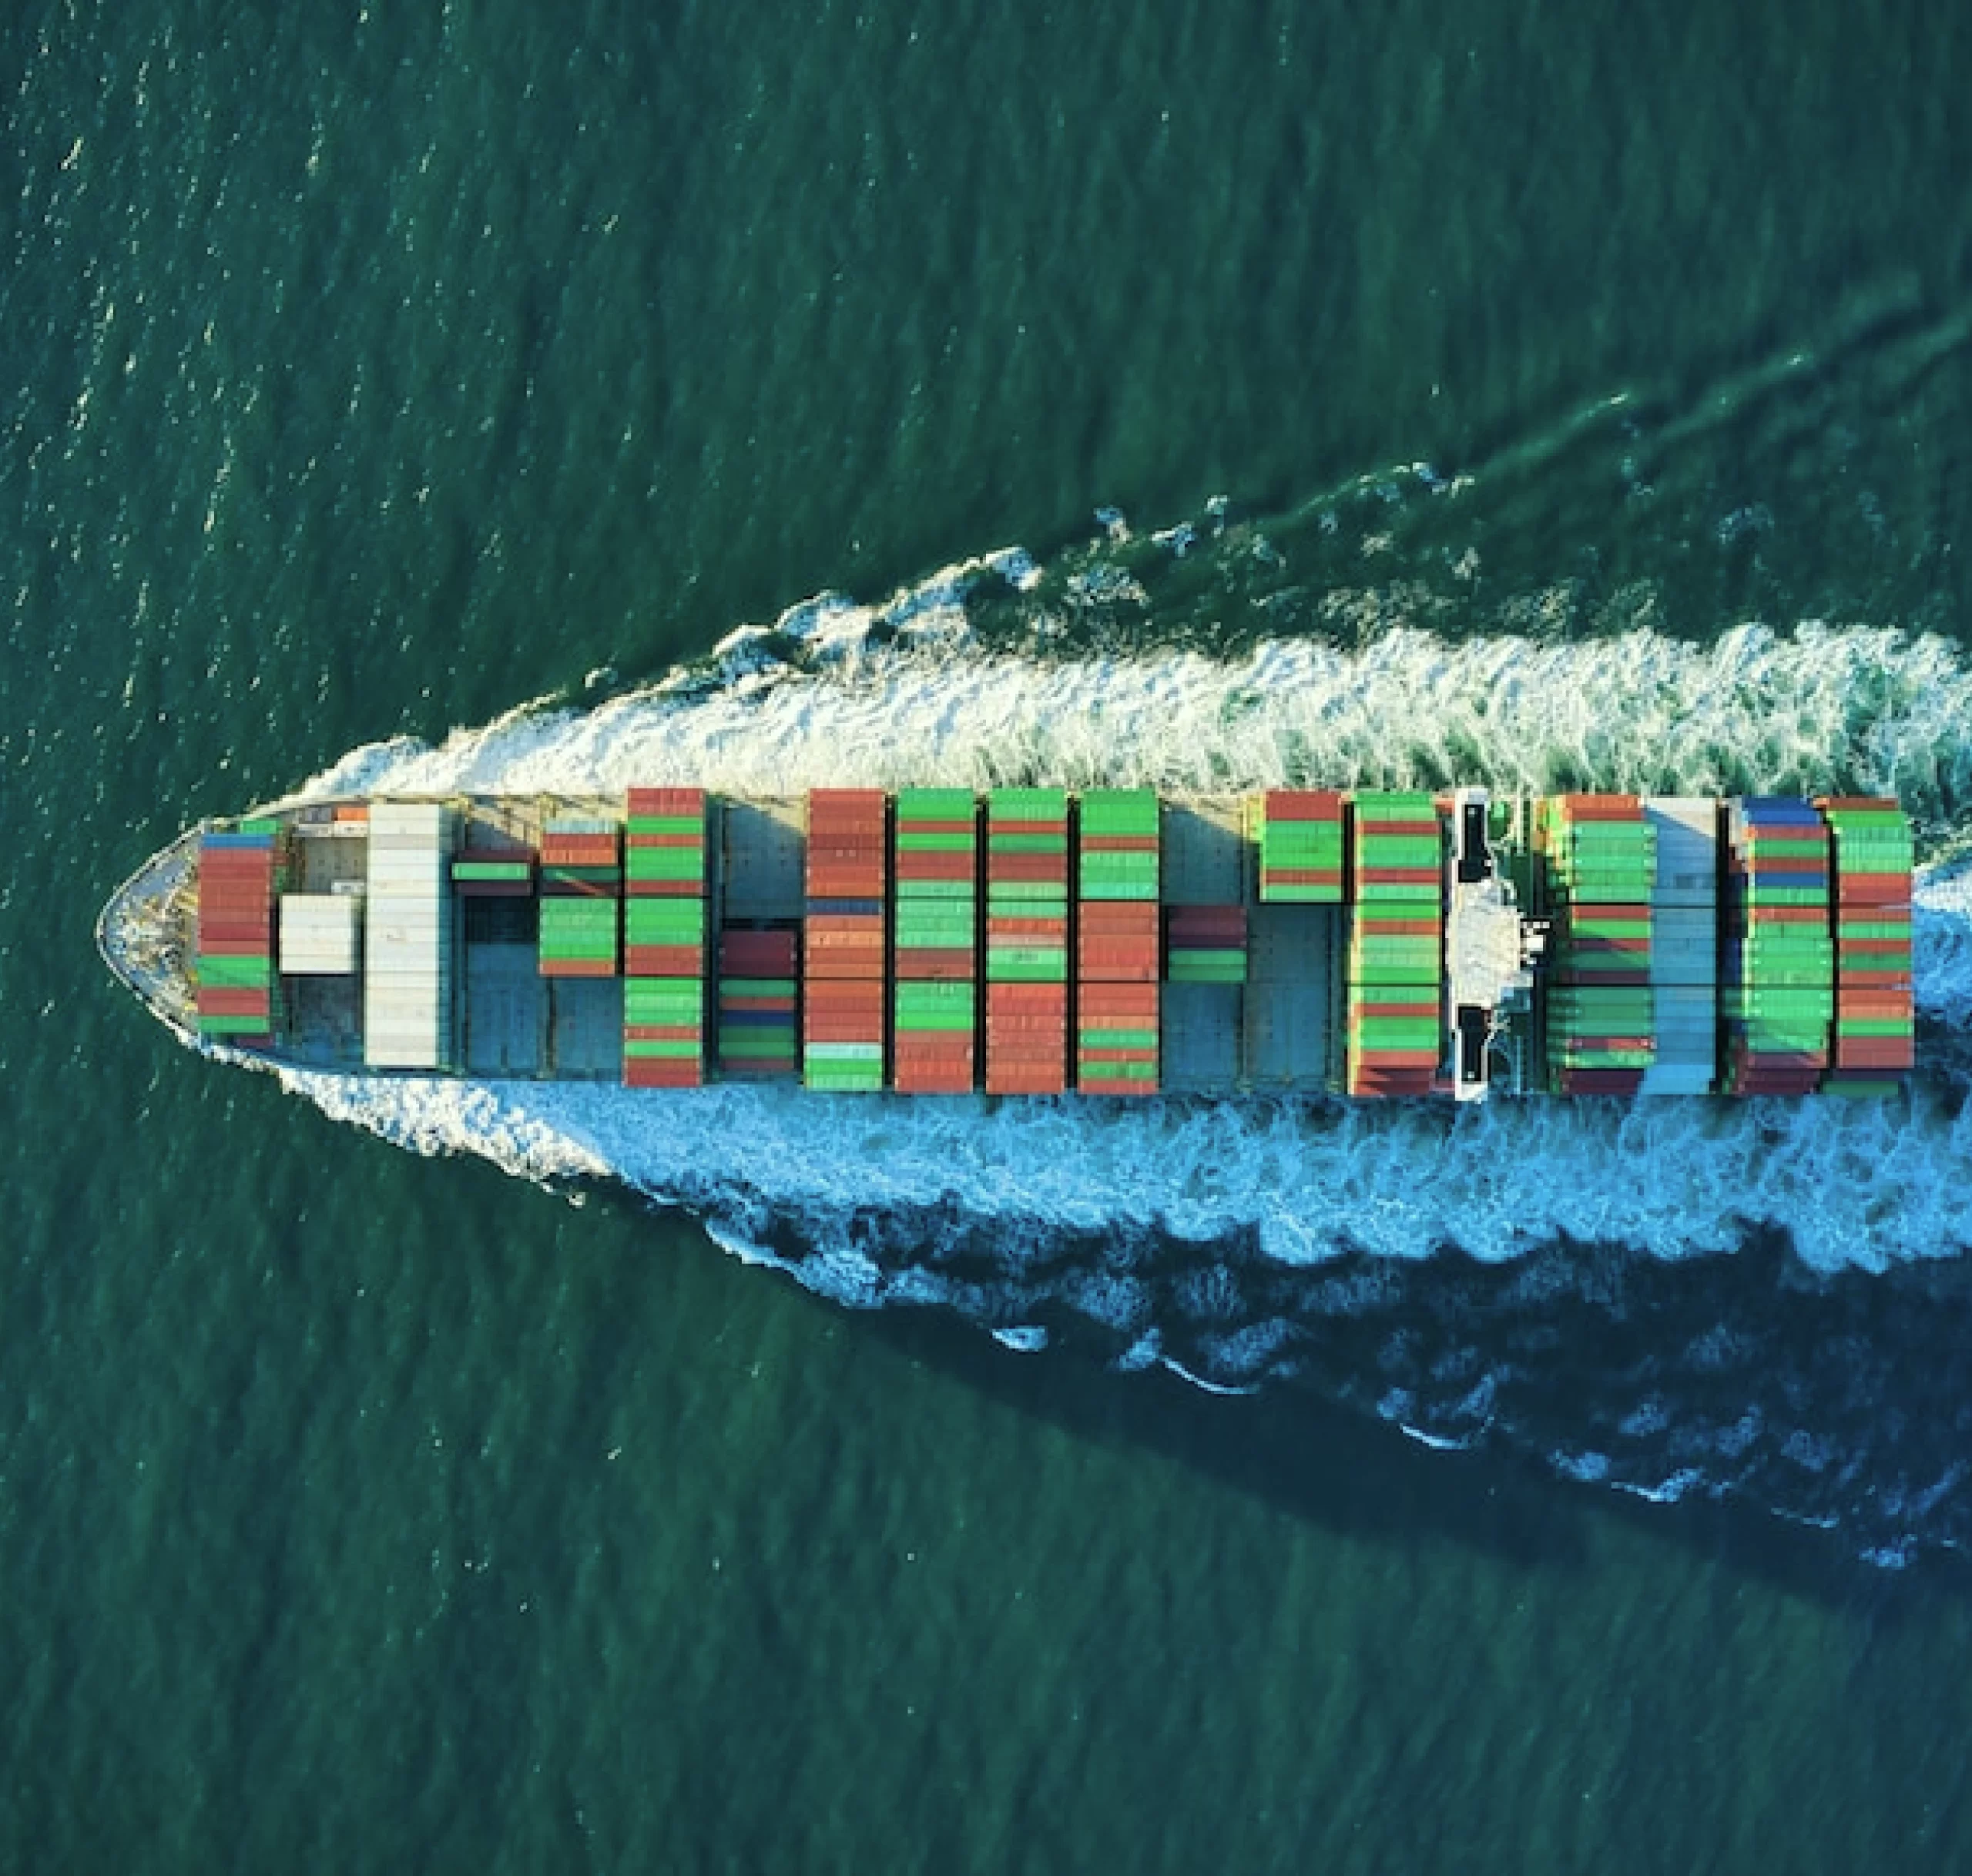 Company delivering aerial views of container ships in the ocean.